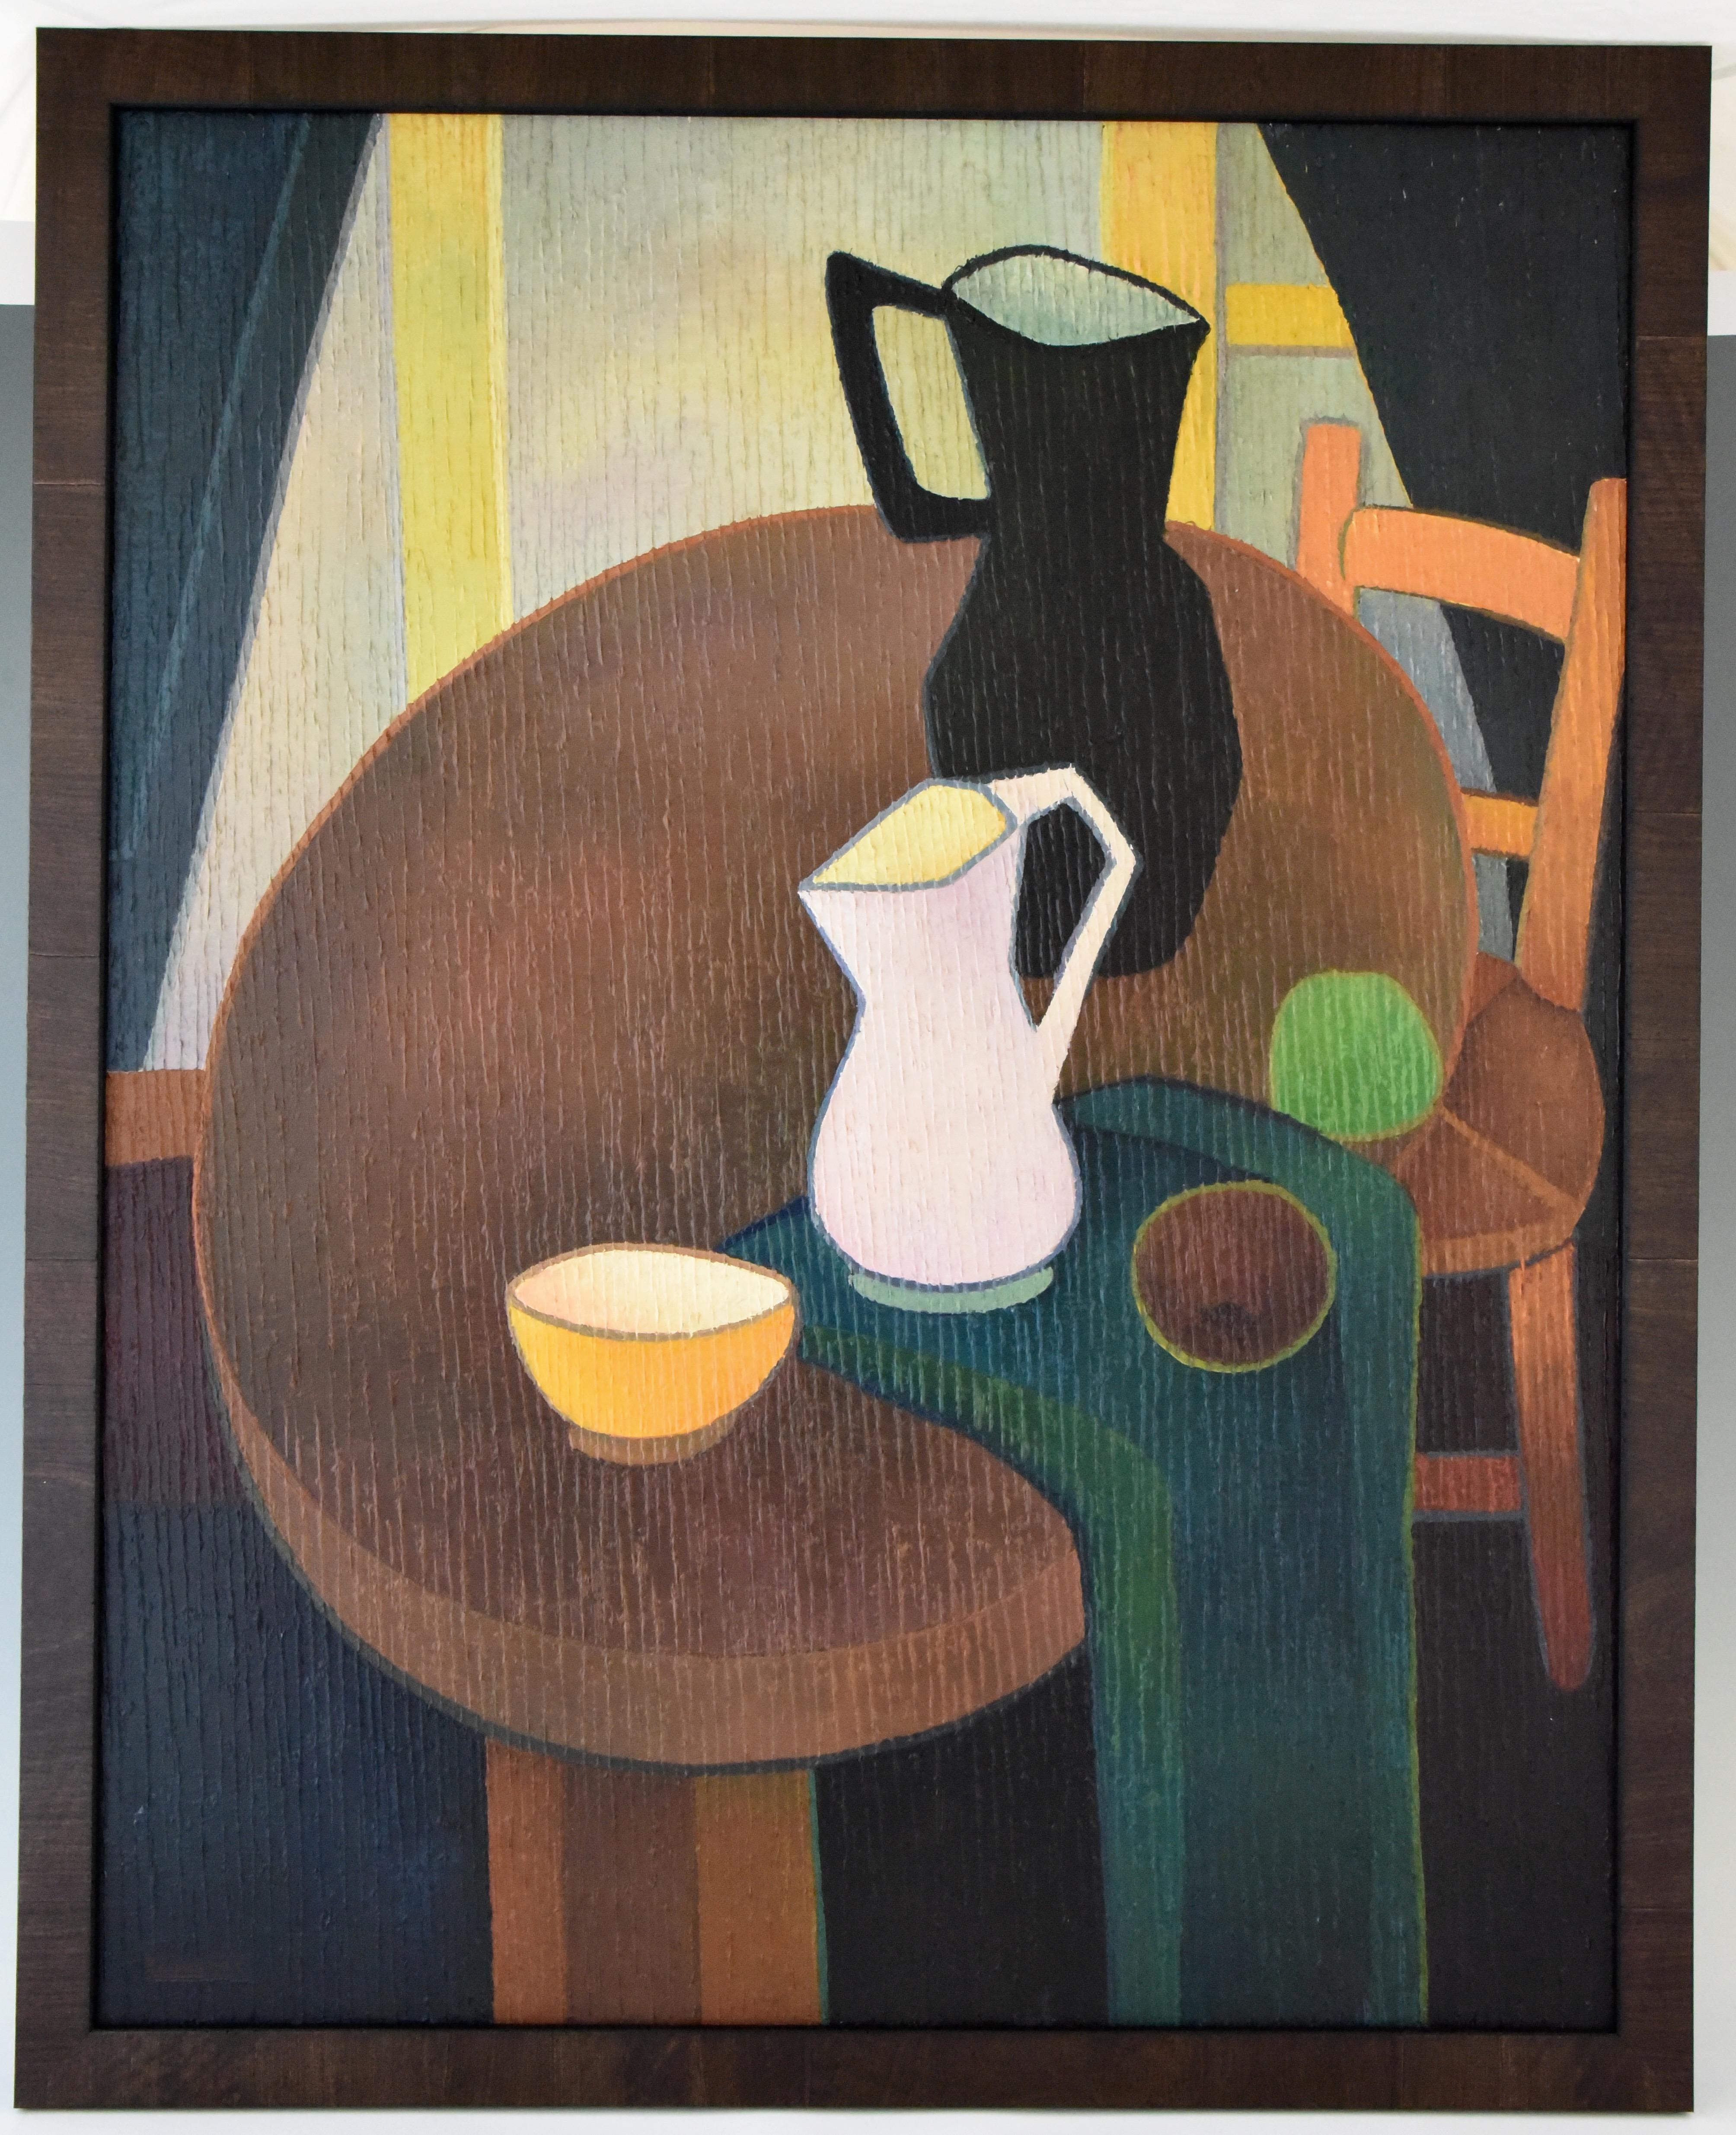 Beautiful midcentury painting of an interior still life.
Two jugs and an apple on a table.
This work is signed by the artist Albert Labachot and has a very special technique with relief stripes in the paint, France, circa 1960.
Size of the